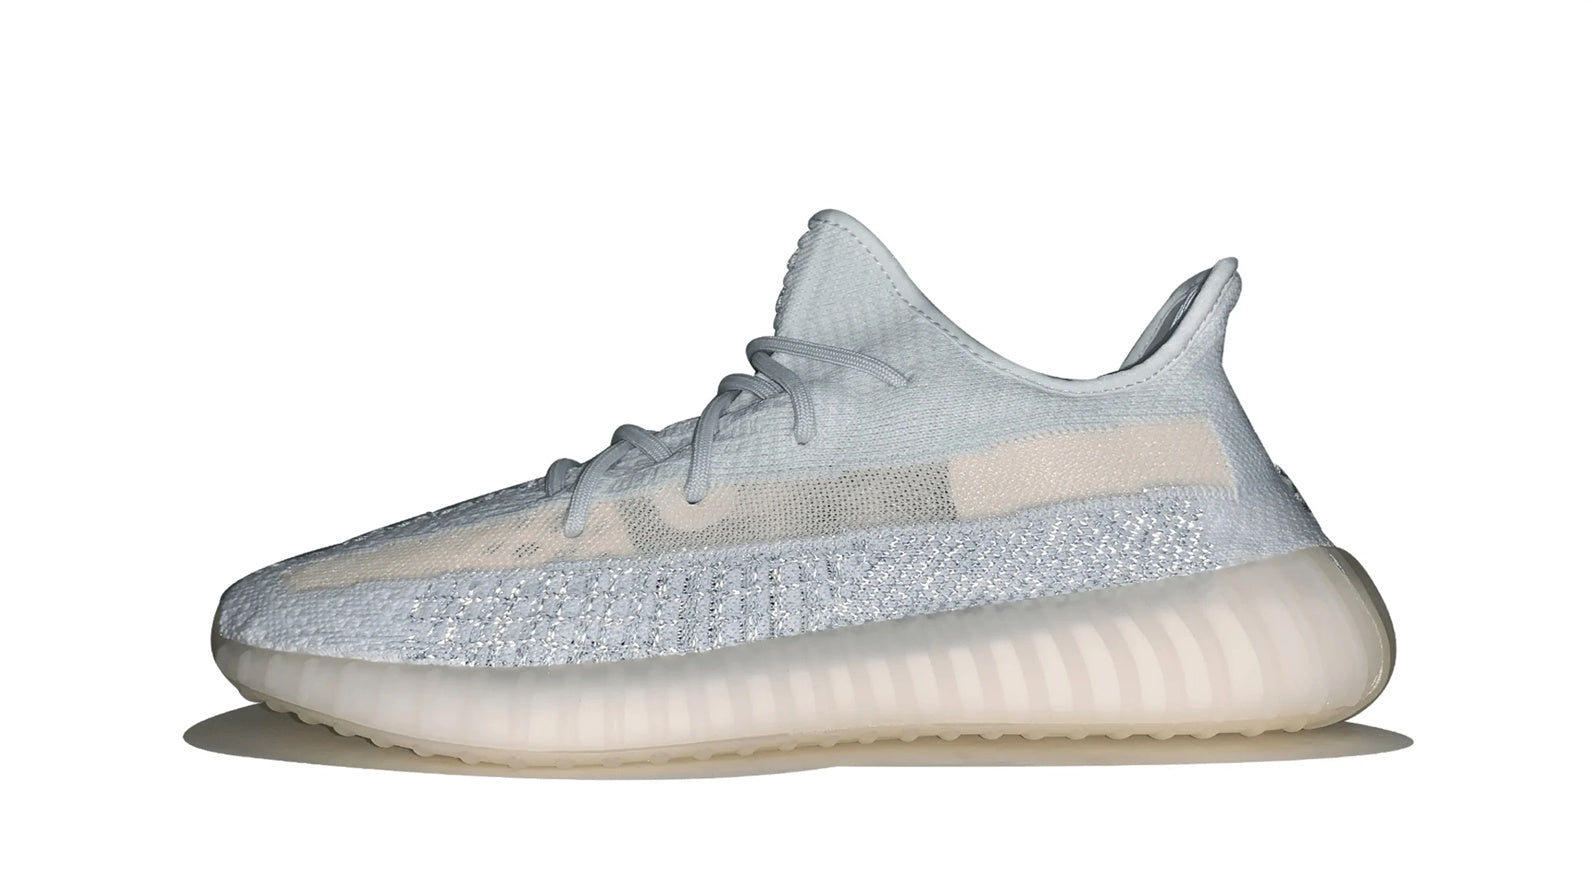 Yeezy Boost 350 V2 Cloud White Reflective – FW5317